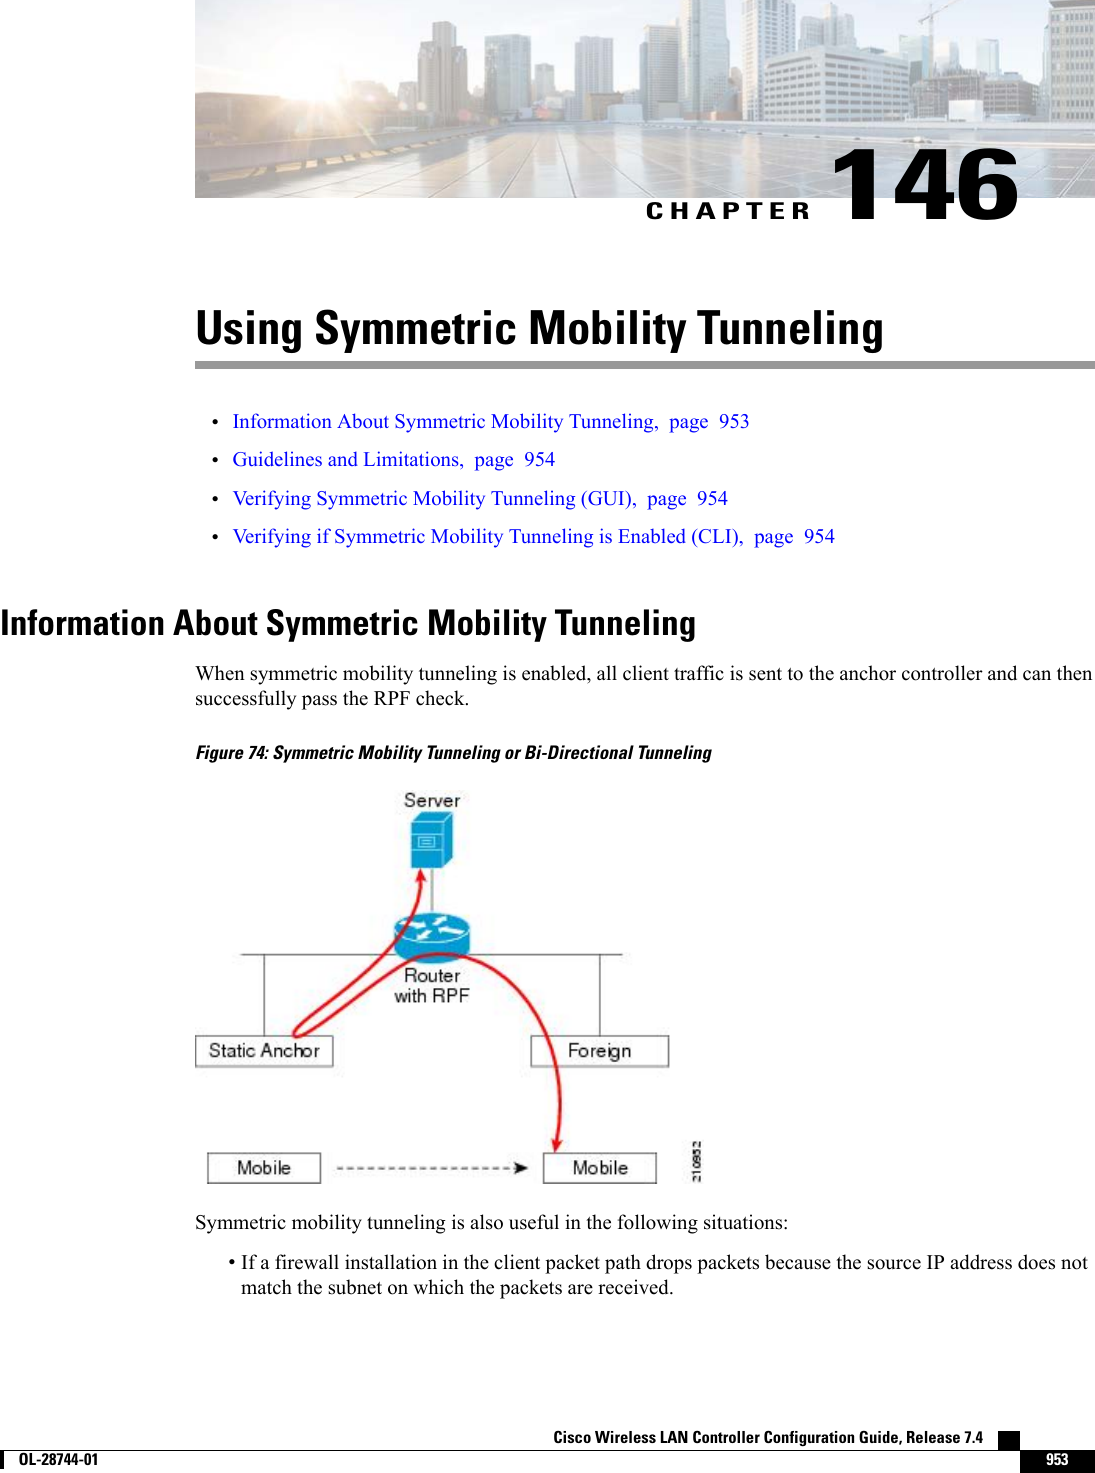 CHAPTER 146Using Symmetric Mobility Tunneling•Information About Symmetric Mobility Tunneling, page 953•Guidelines and Limitations, page 954•Verifying Symmetric Mobility Tunneling (GUI), page 954•Verifying if Symmetric Mobility Tunneling is Enabled (CLI), page 954Information About Symmetric Mobility TunnelingWhen symmetric mobility tunneling is enabled, all client traffic is sent to the anchor controller and can thensuccessfully pass the RPF check.Figure 74: Symmetric Mobility Tunneling or Bi-Directional TunnelingSymmetric mobility tunneling is also useful in the following situations:•If a firewall installation in the client packet path drops packets because the source IP address does notmatch the subnet on which the packets are received.Cisco Wireless LAN Controller Configuration Guide, Release 7.4        OL-28744-01 953